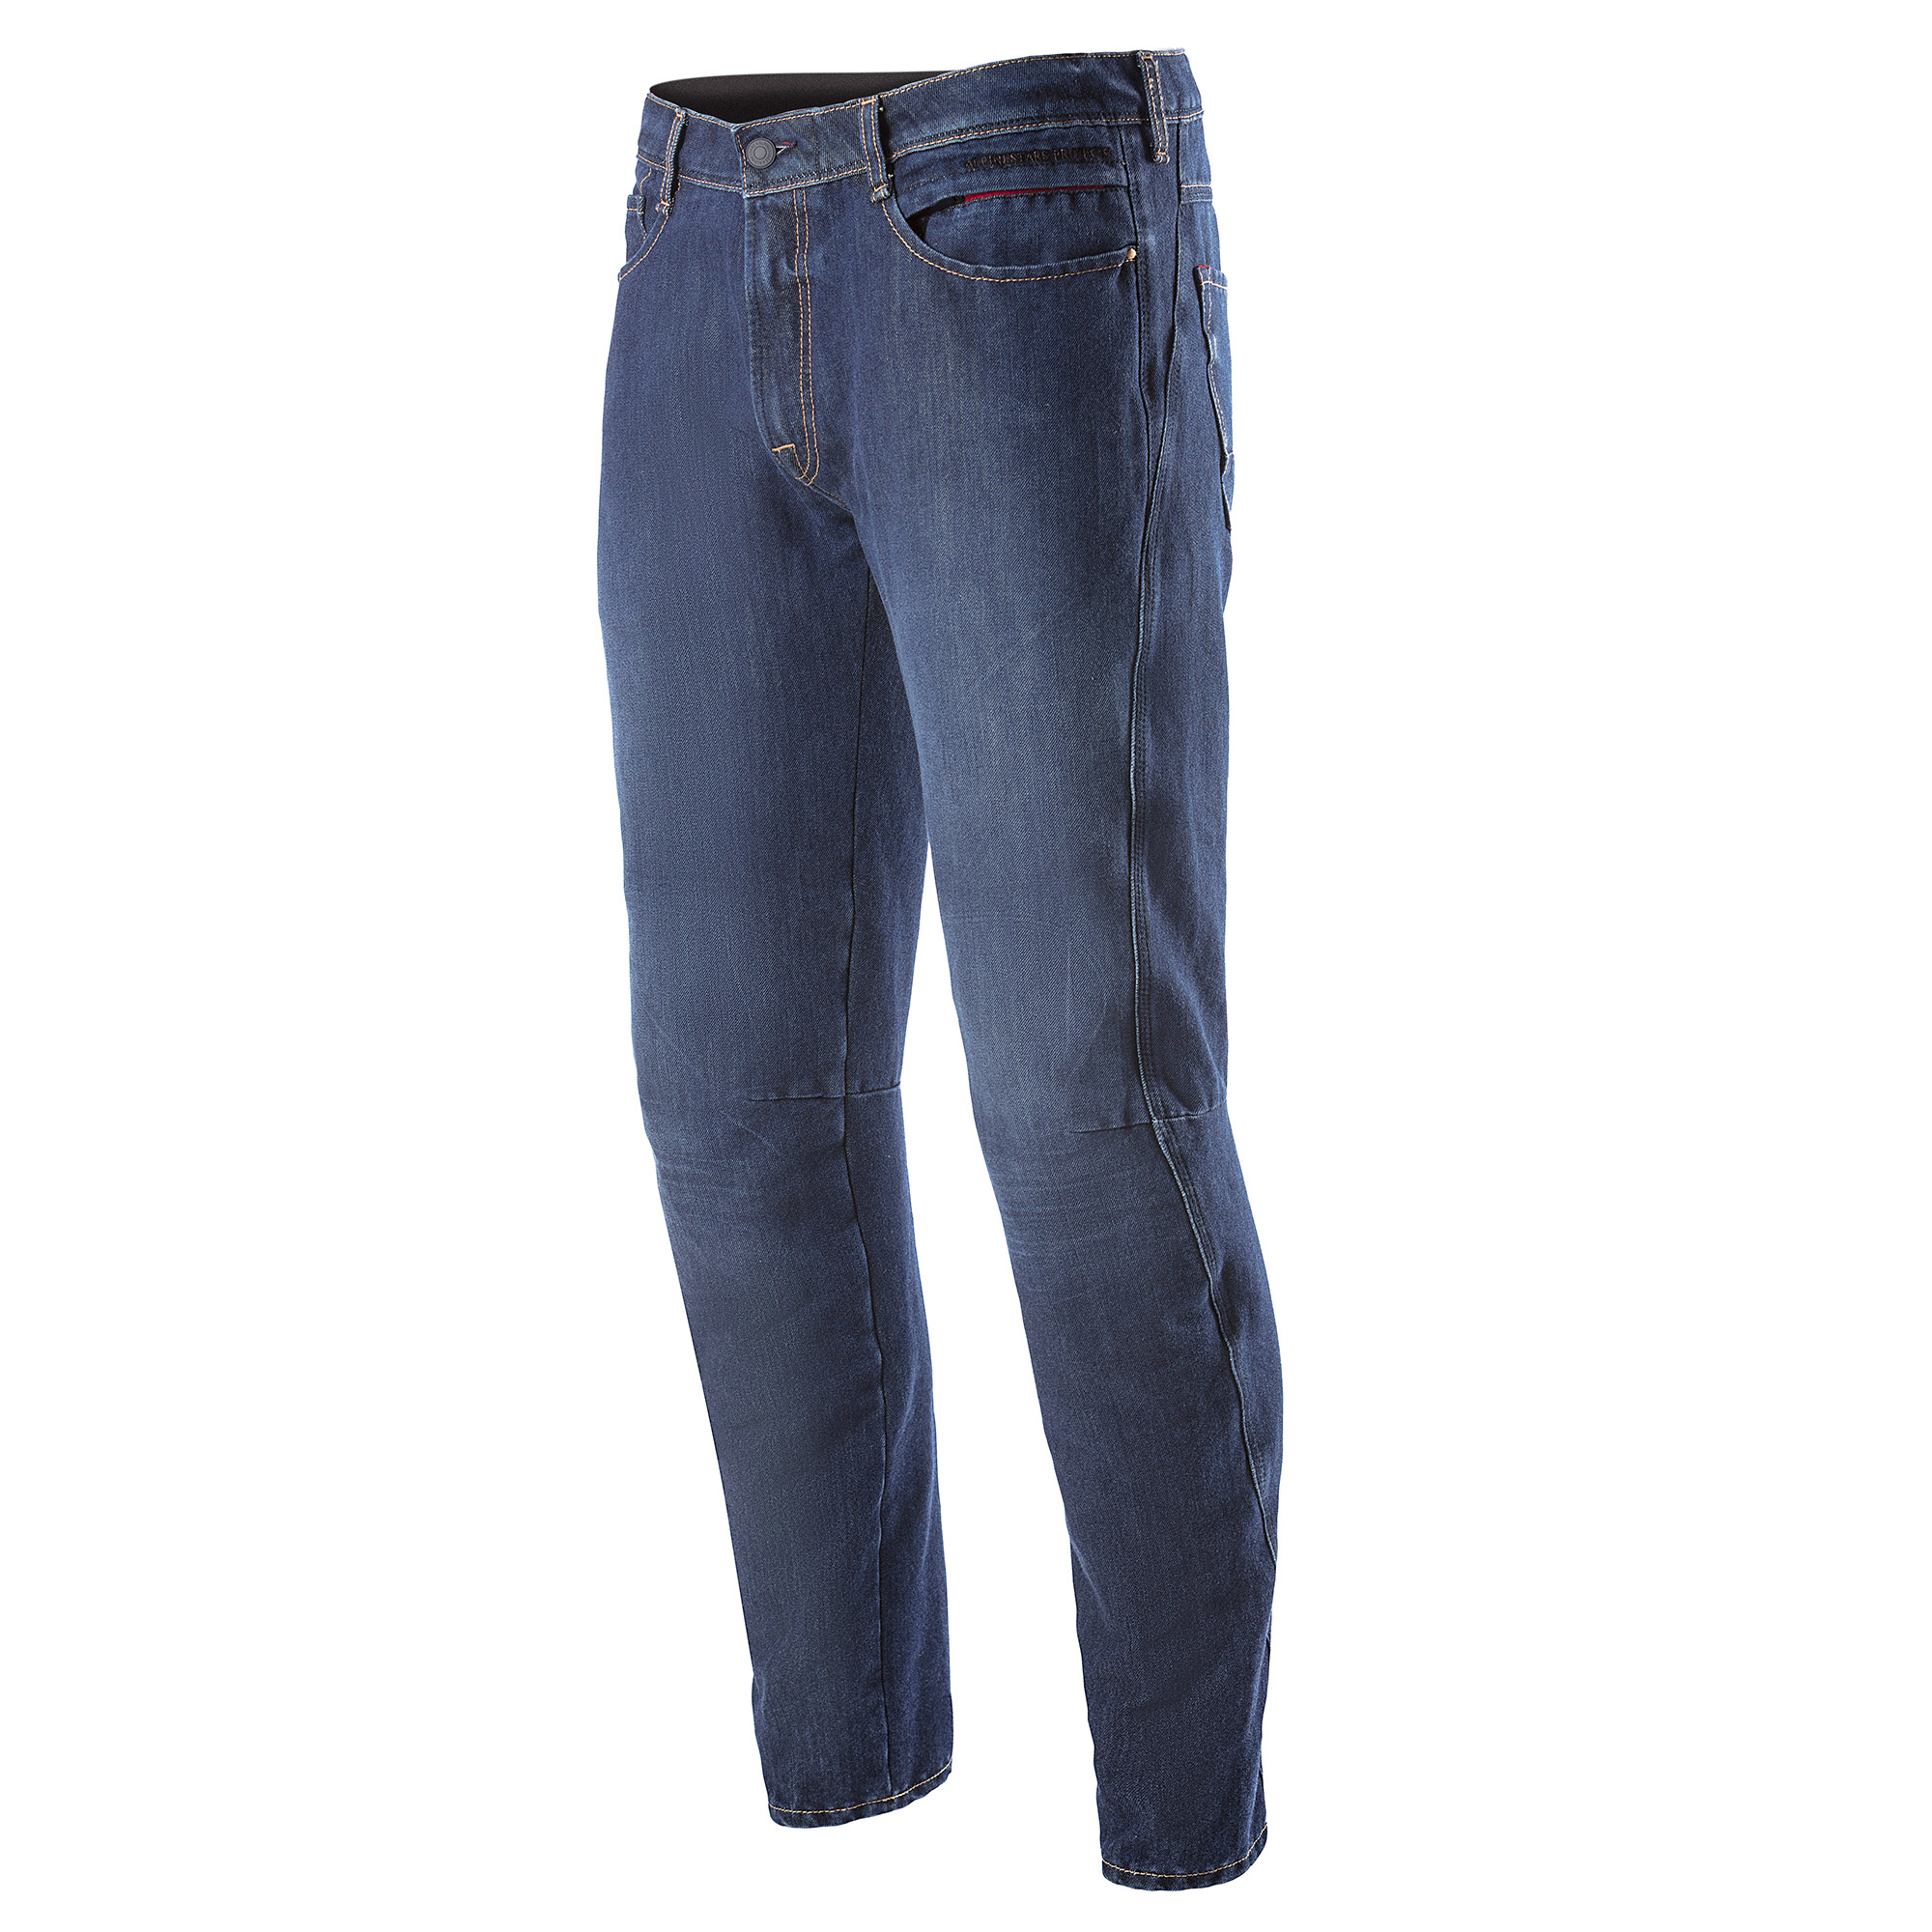 ce level 2 motorcycle jeans